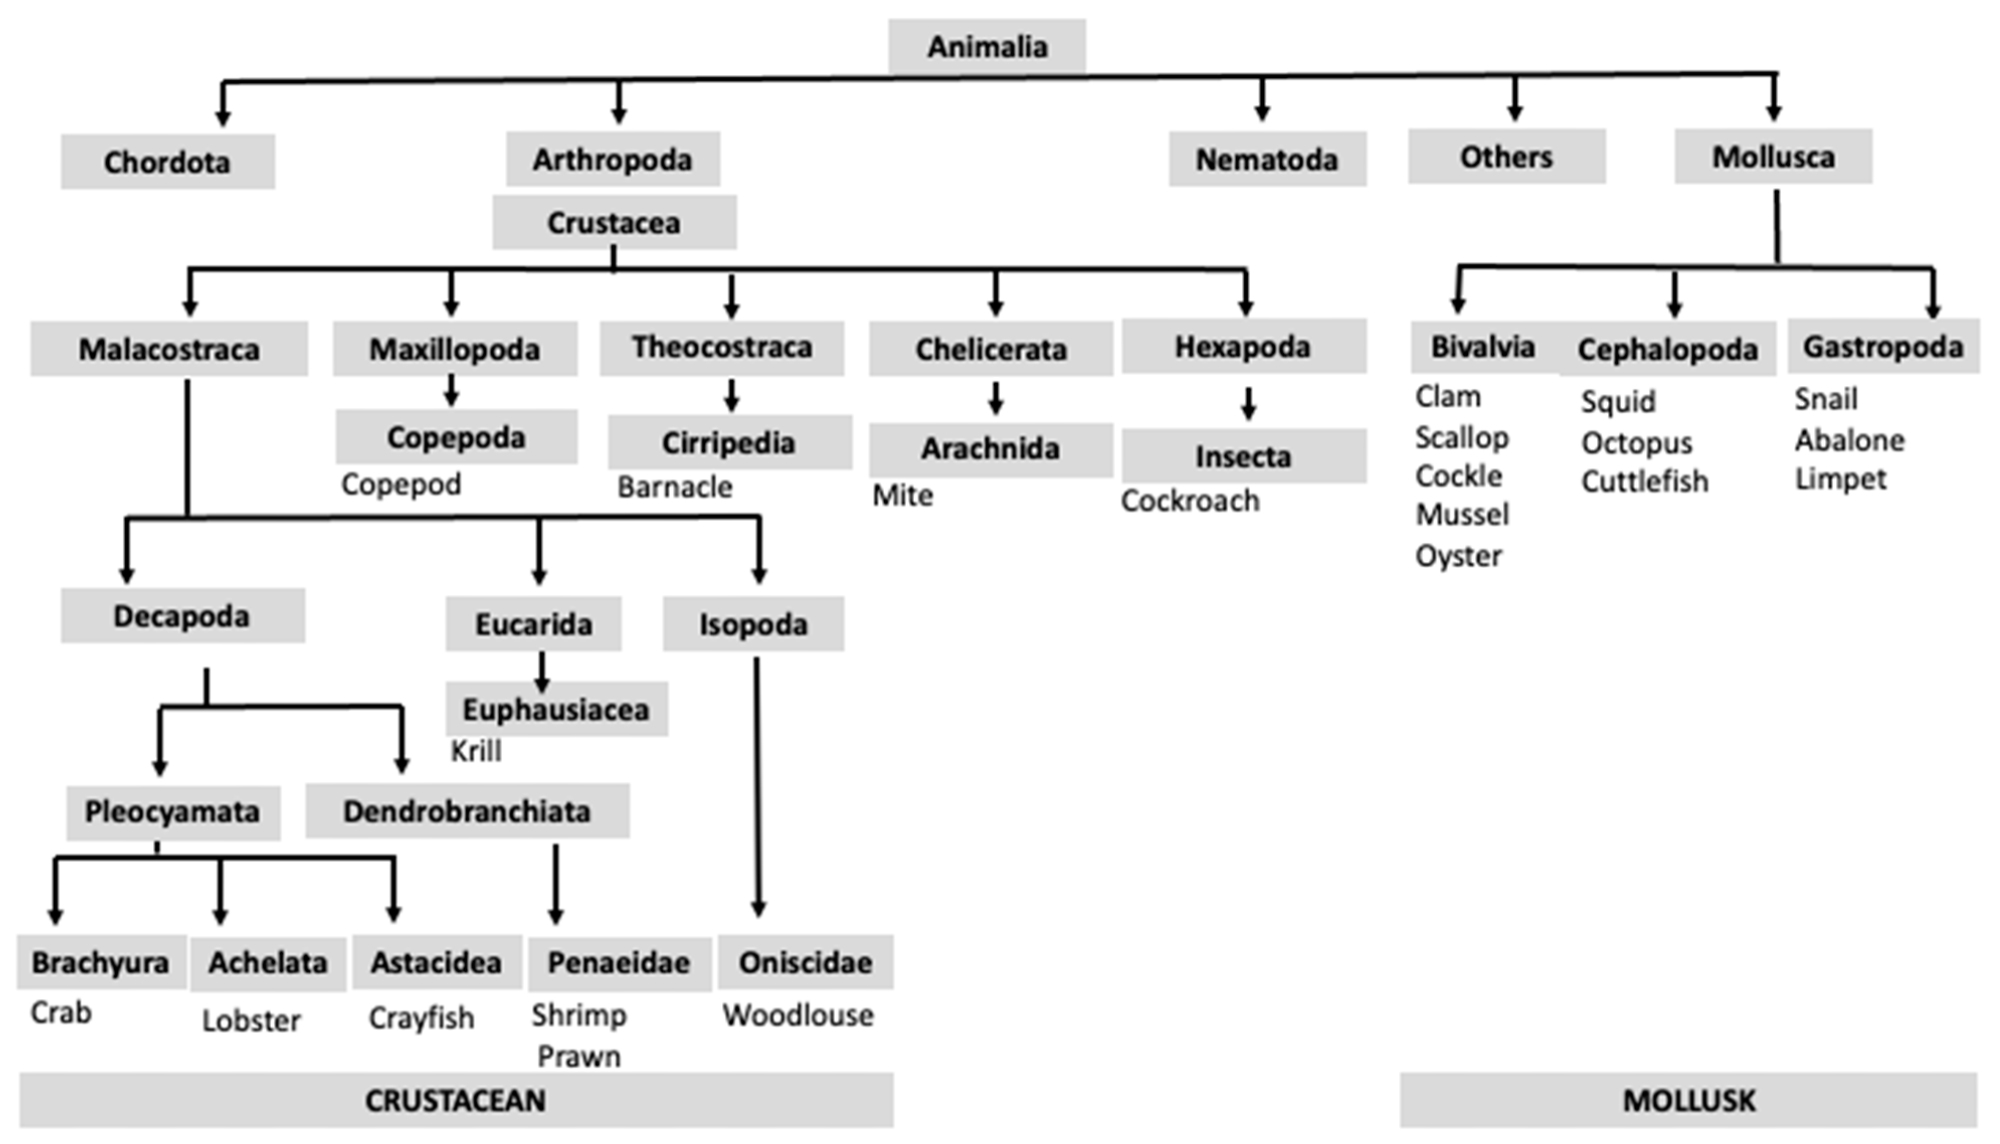 Taxonomic classification of shellfish species within the Crustacea subphylum and the Mollusca phylum.